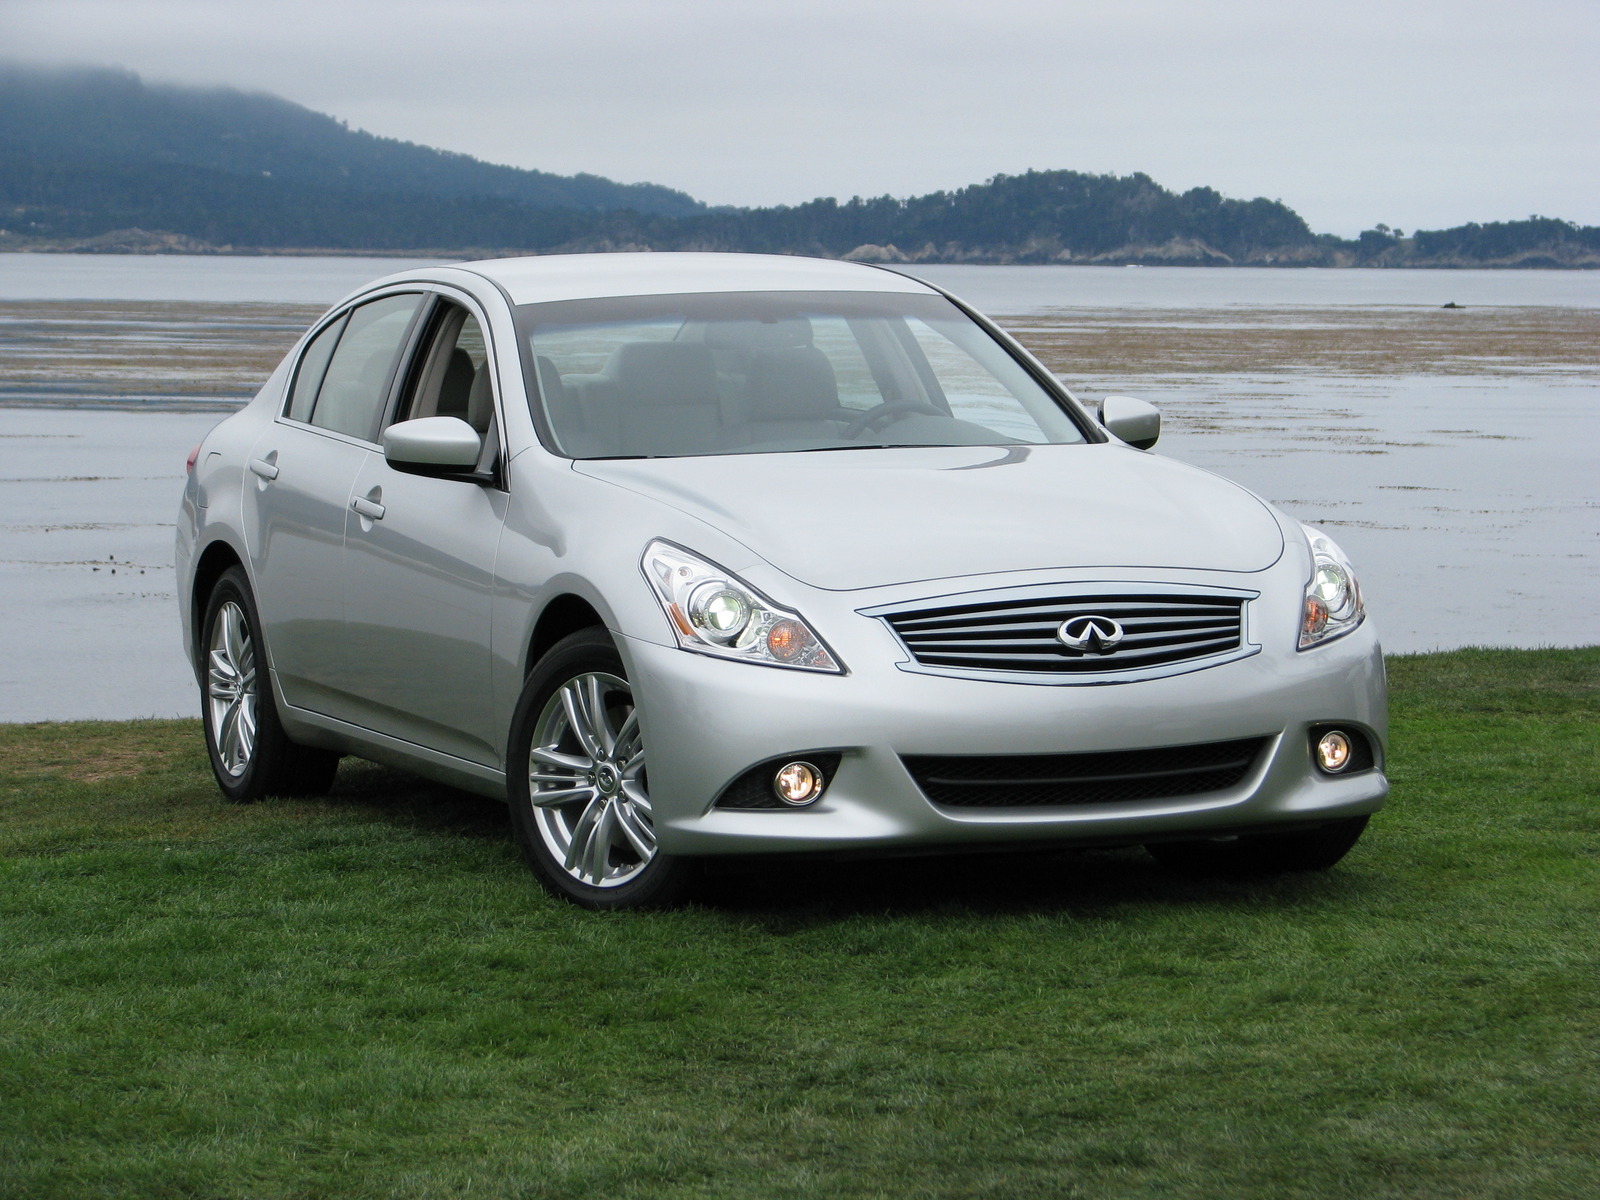 2011 Infiniti G25 On Sale Now, Starts From $30,950